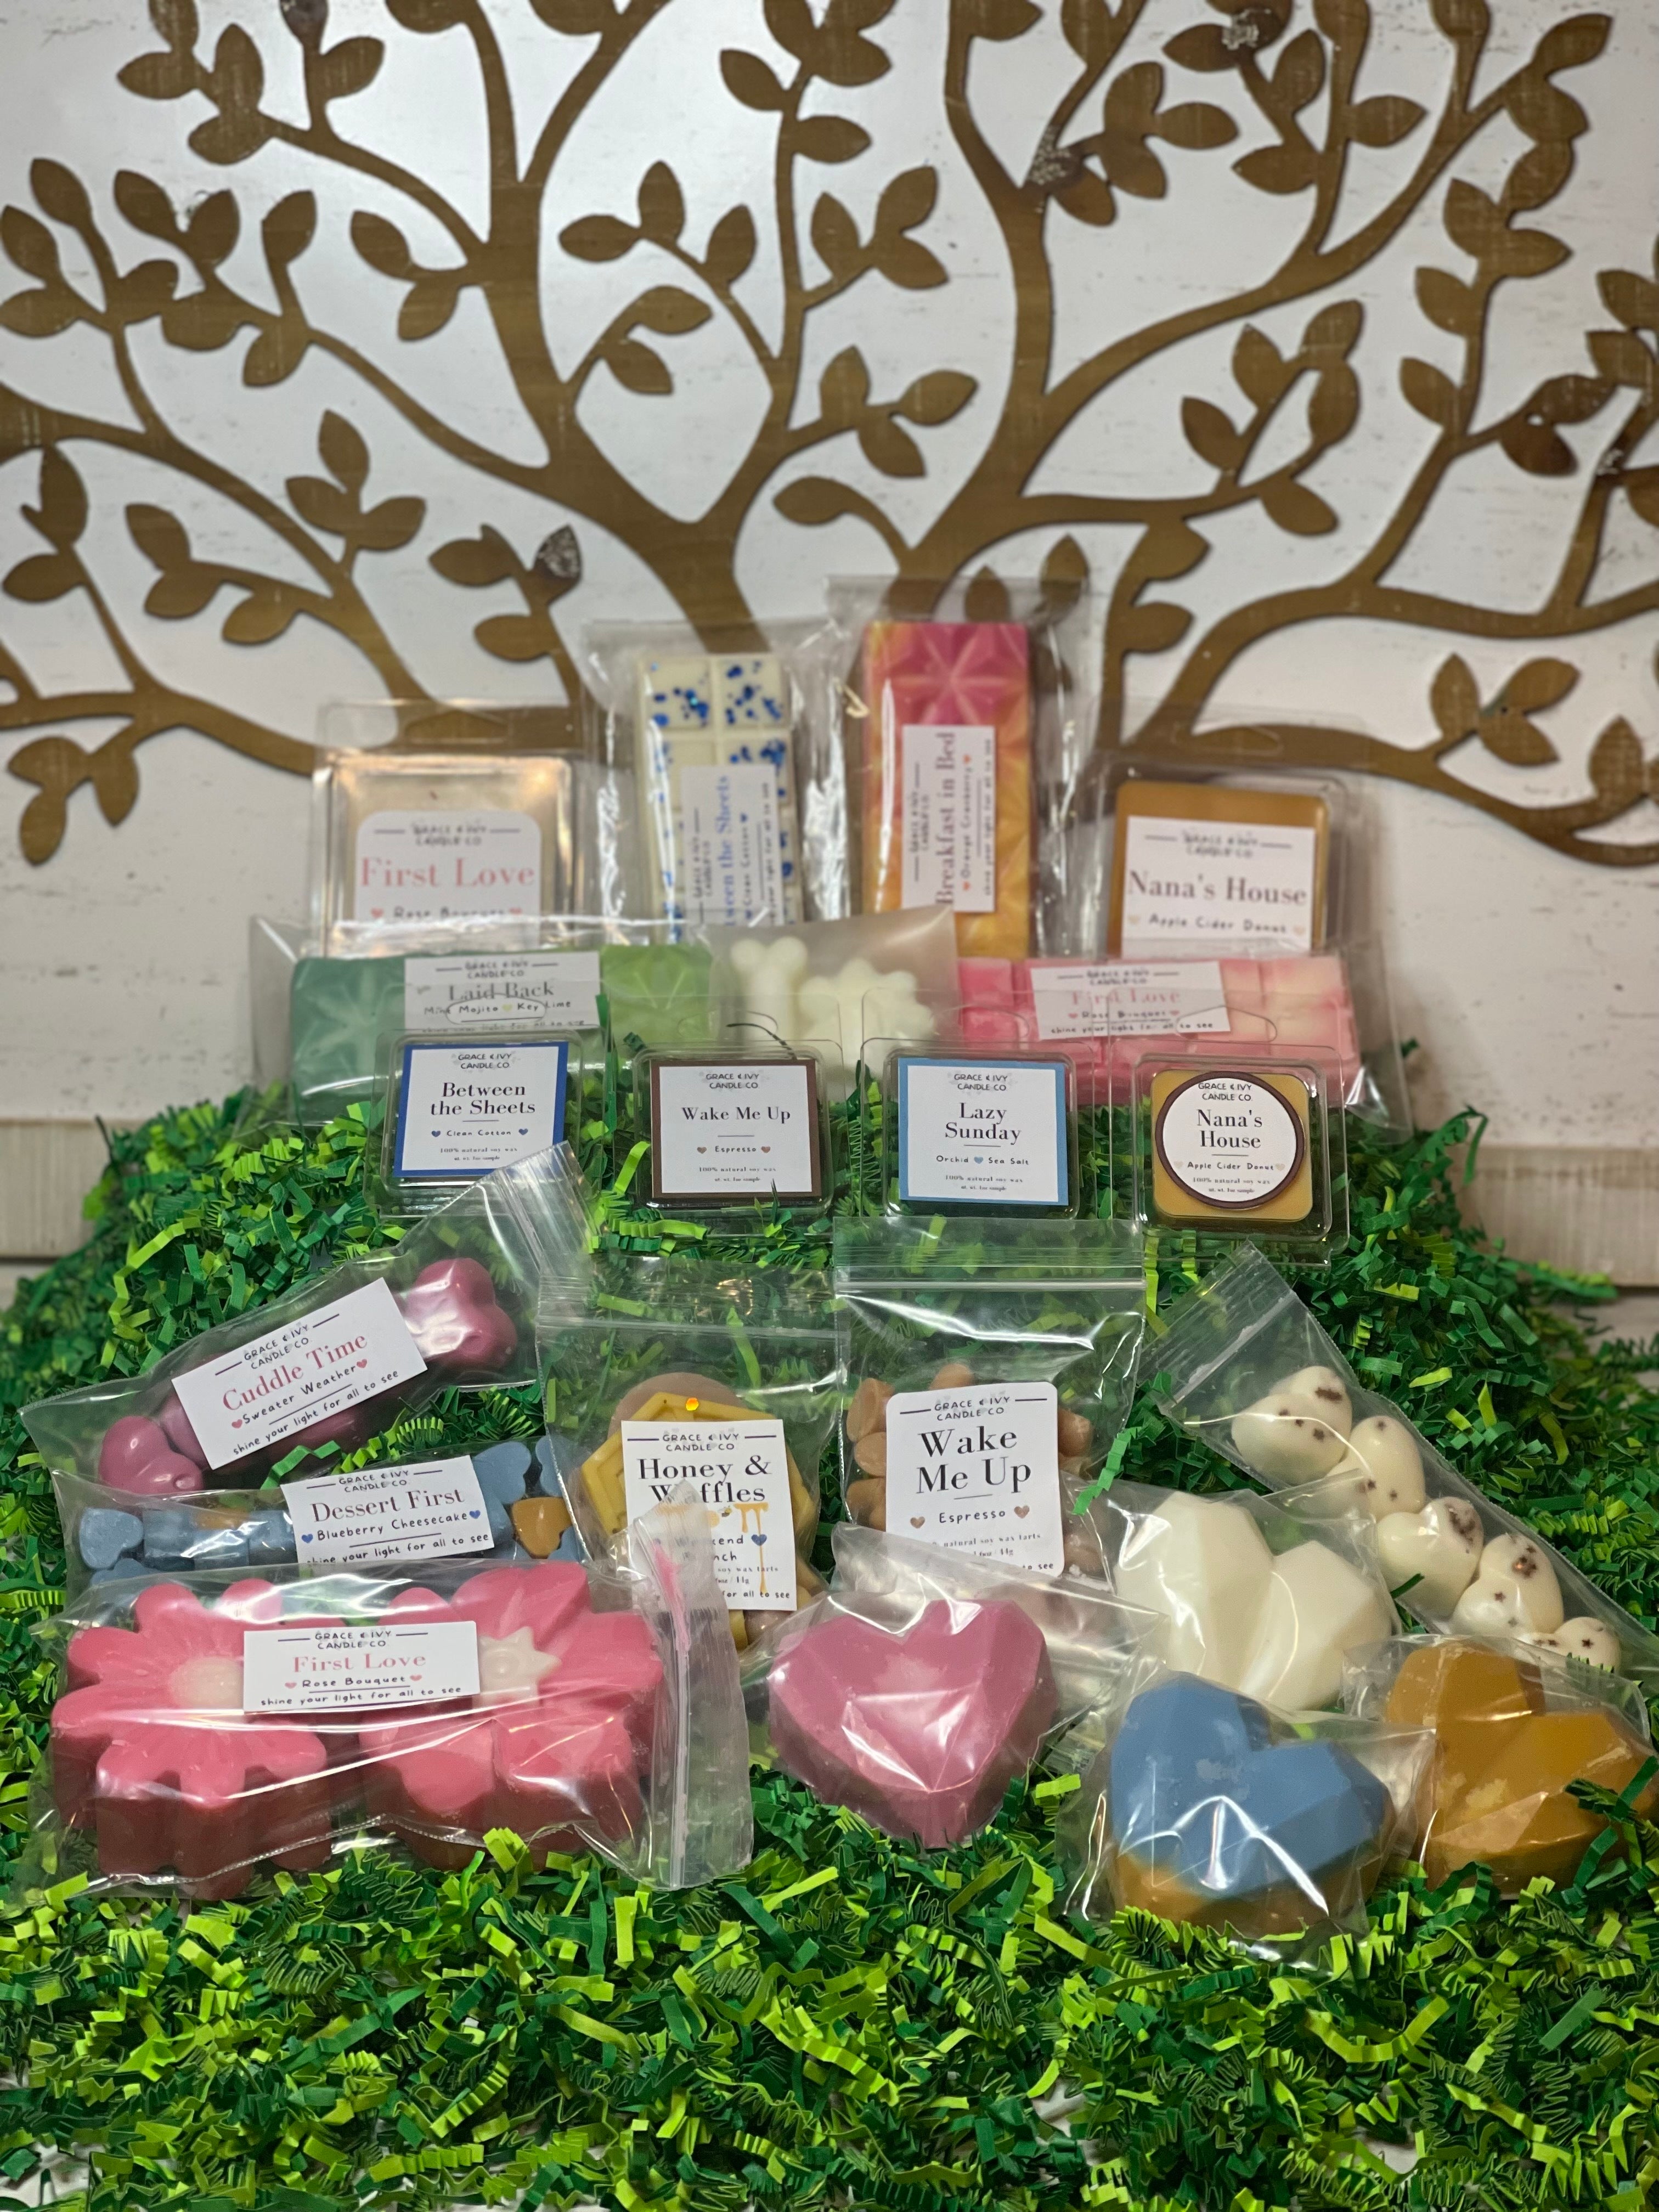 Mystery Sampler Box of wax melts - Large